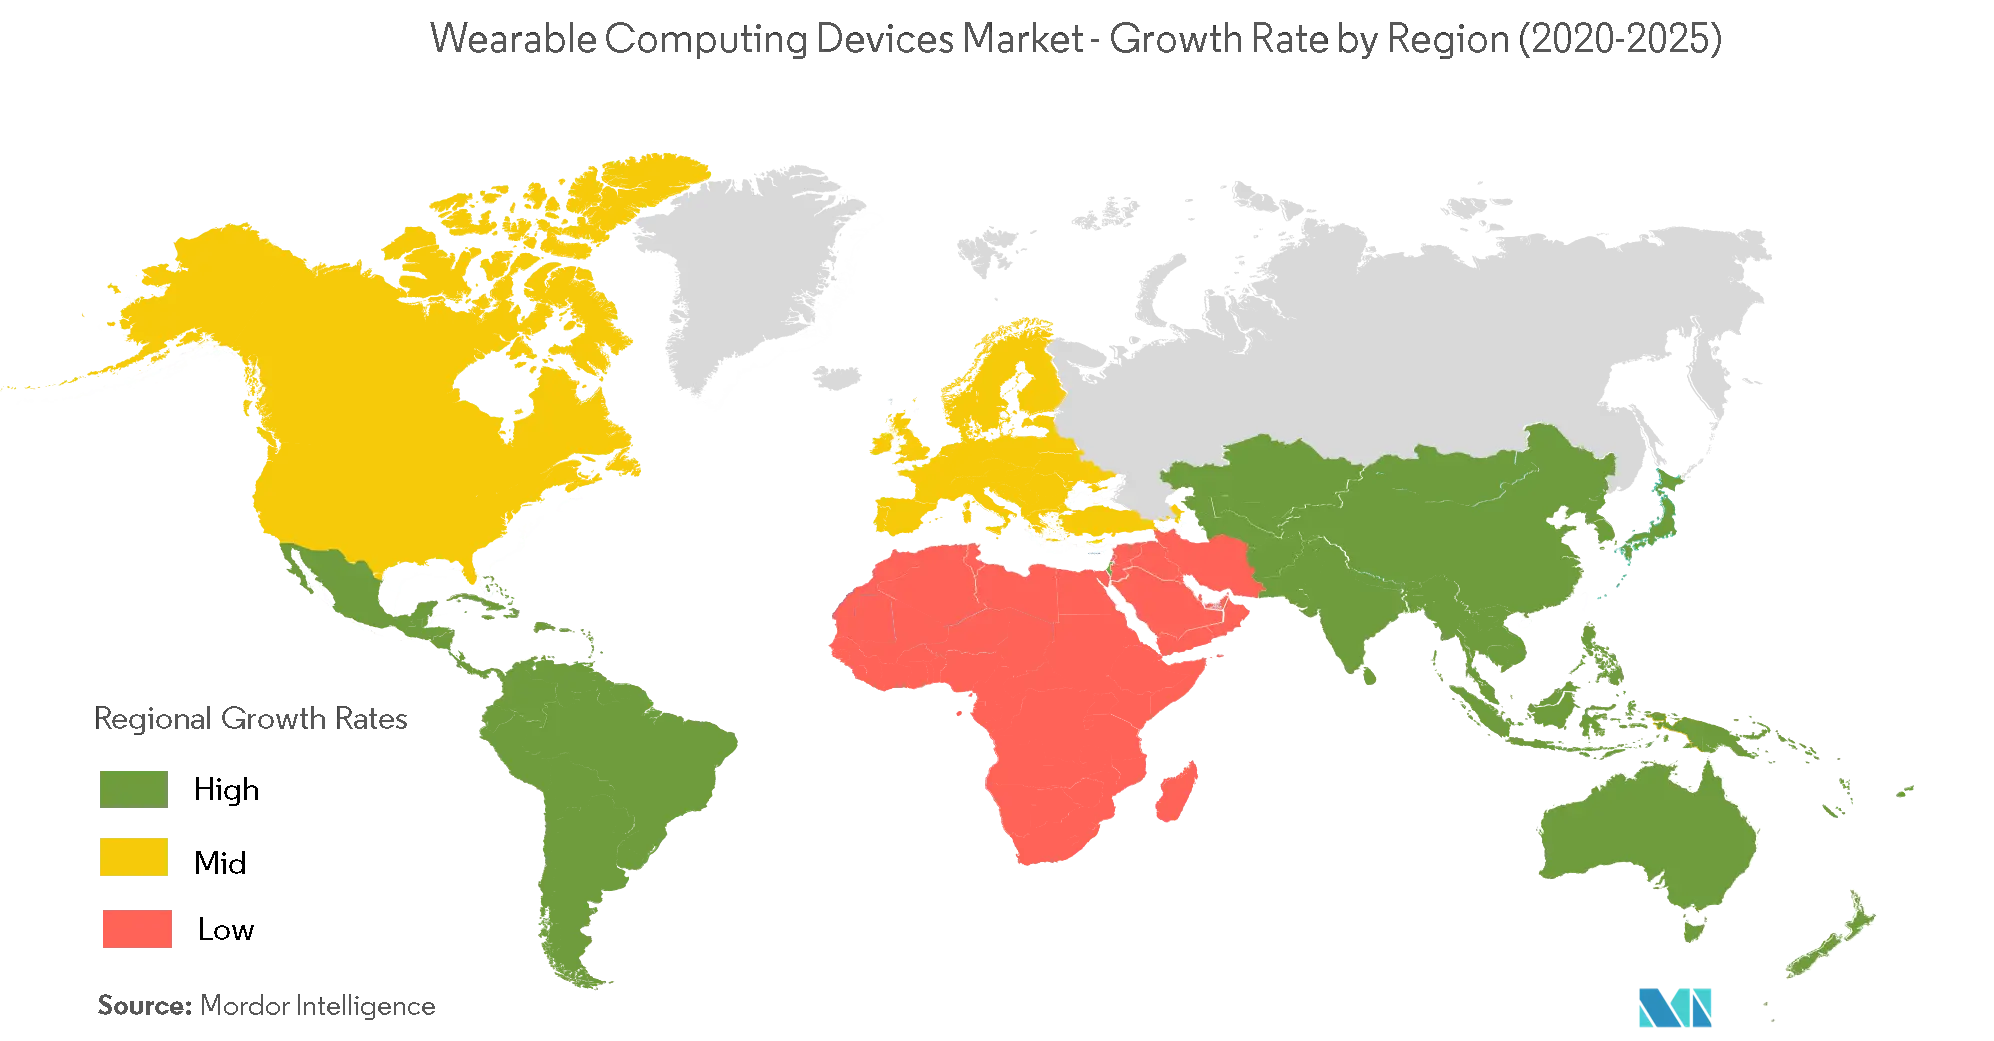 Wearable Computing Devices Market - Growth Rate by Region (2020 - 2025)